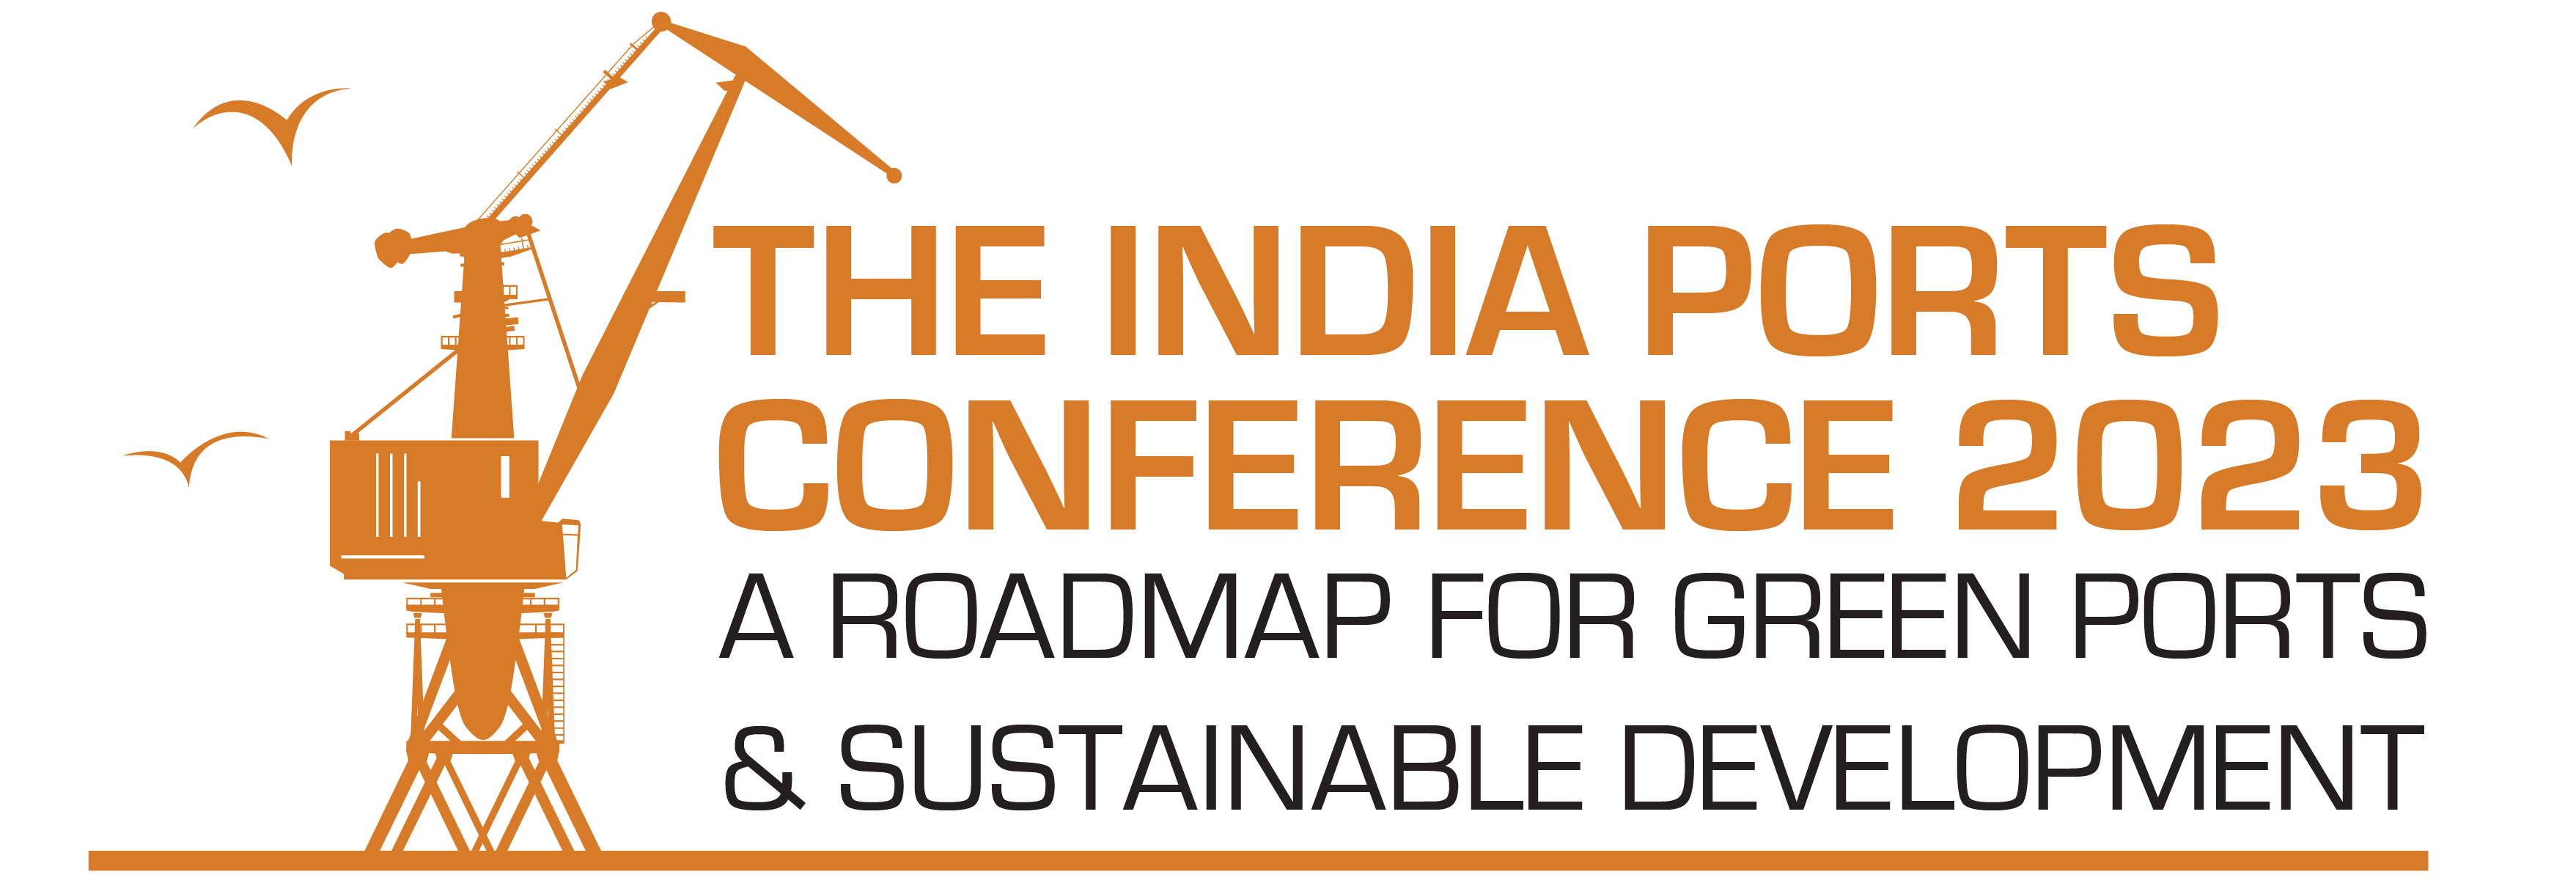 THE INDIA PORTS CONFERENCE 2023